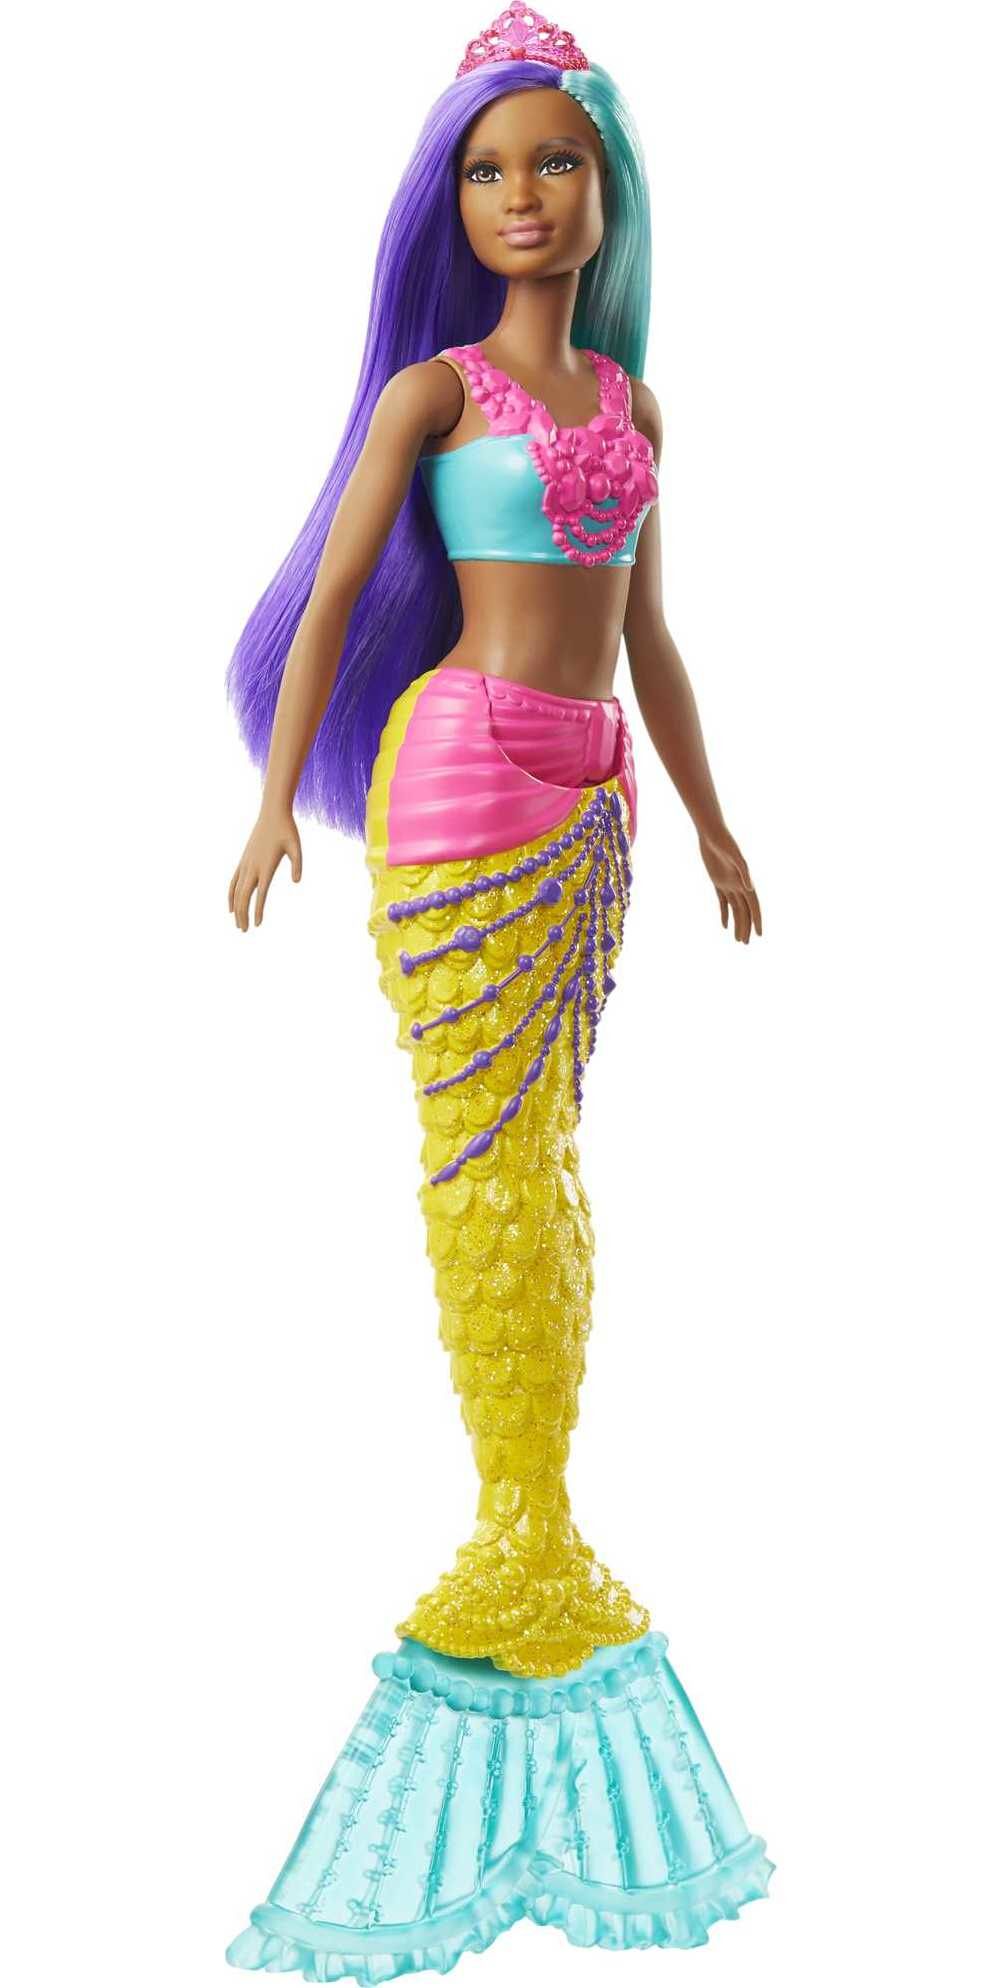 Barbie Dreamtopia Mermaid Doll with Teal & Purple Hair, Yellow Tail & Tiara Accessory - image 1 of 6